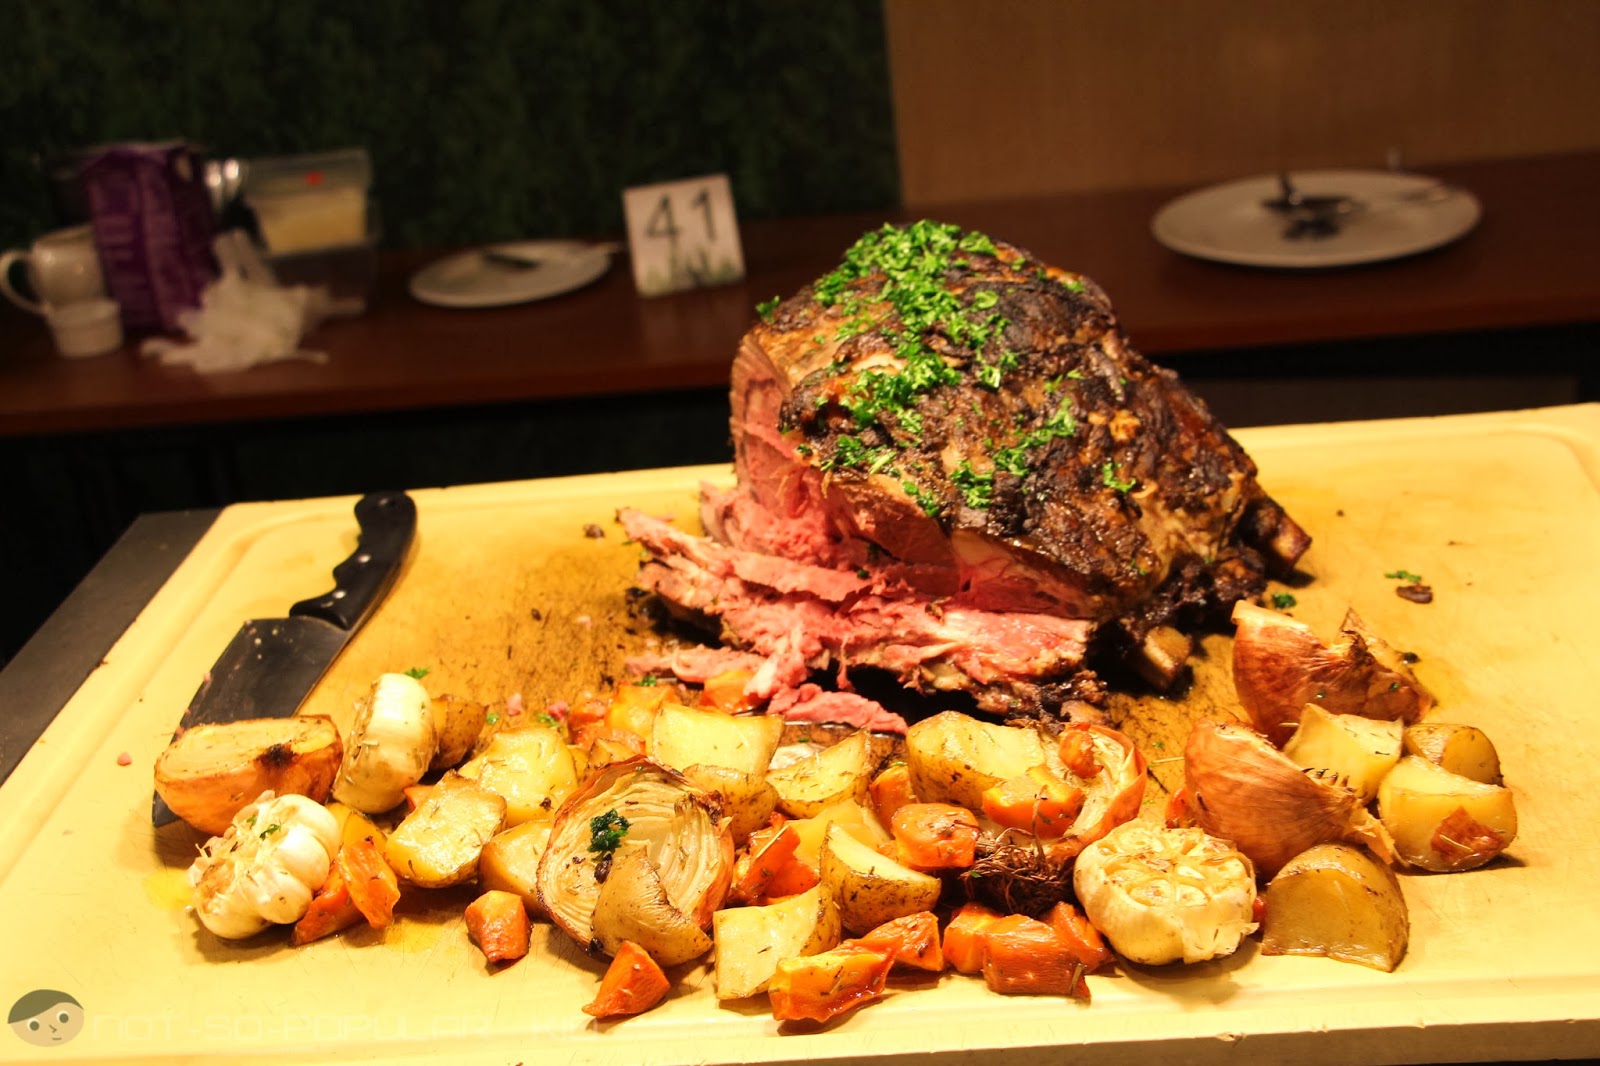 The tantalizing roast beef of Midas Hotel - tender but rare